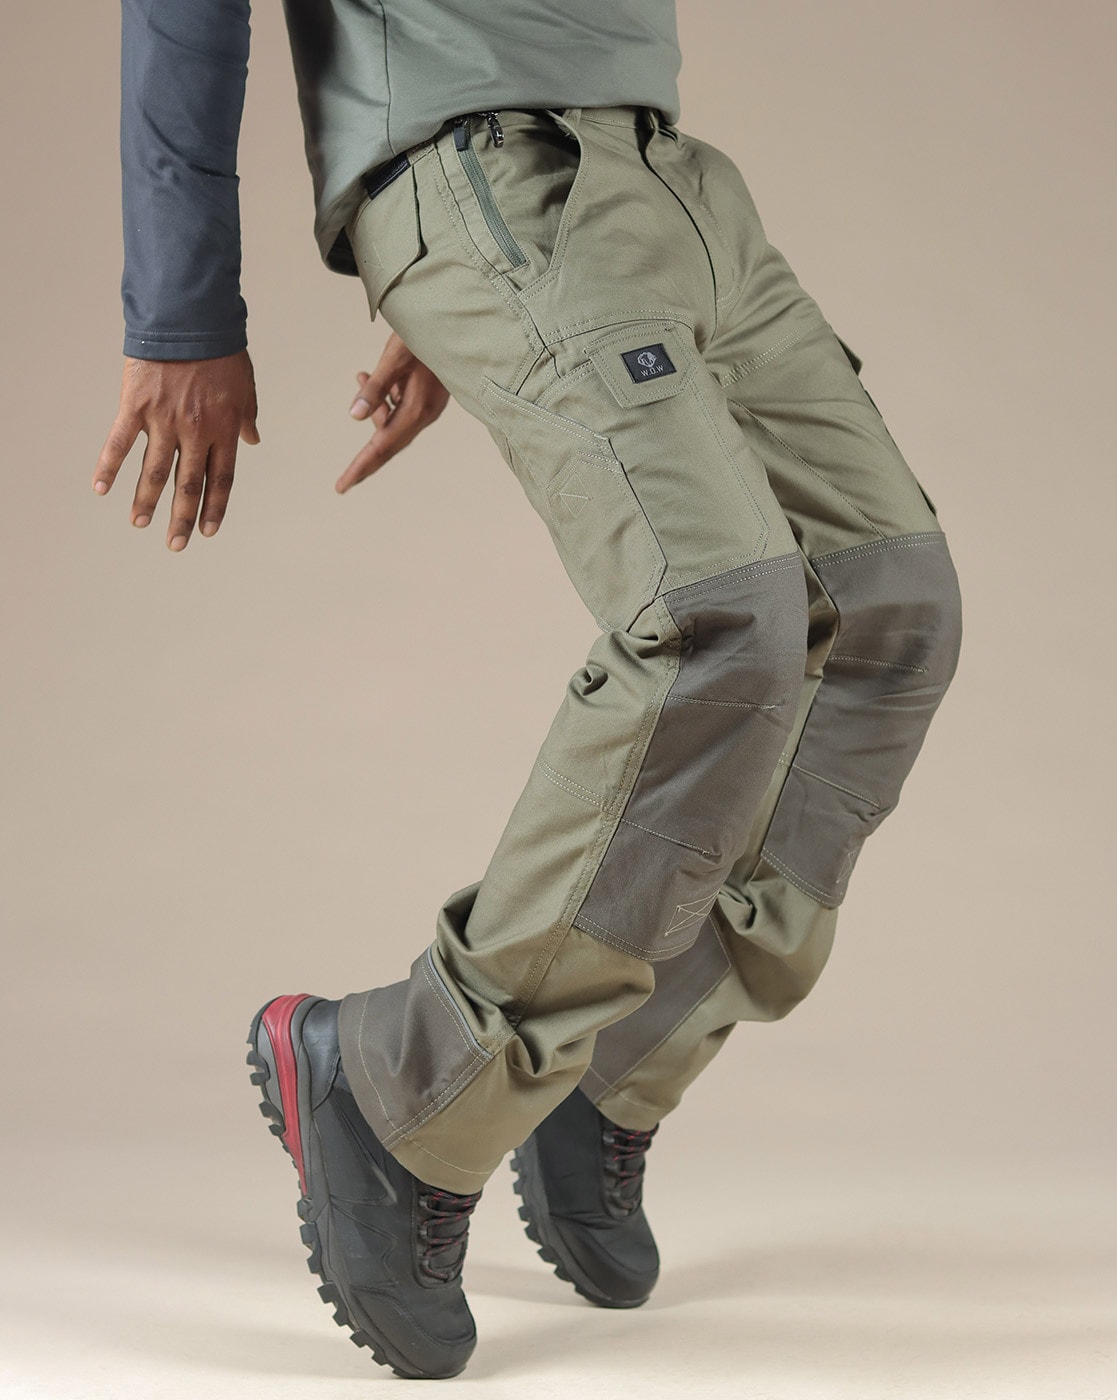 Köhler EXP tactical trousers stone gray olive | Recon Company